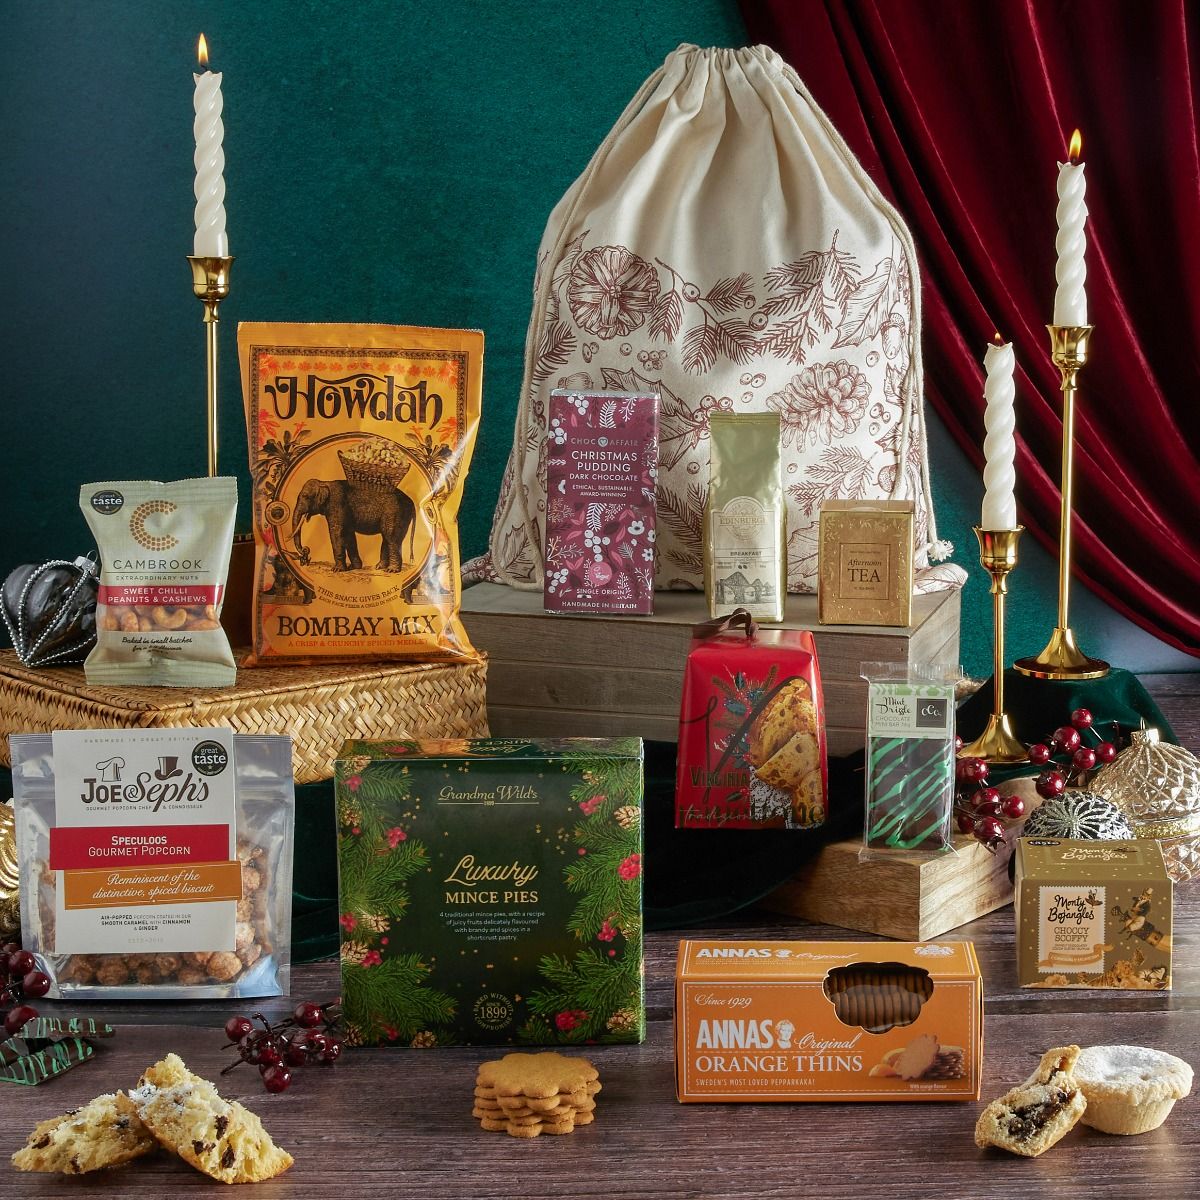 The Festive Favourites Christmas Hamper with contents on display